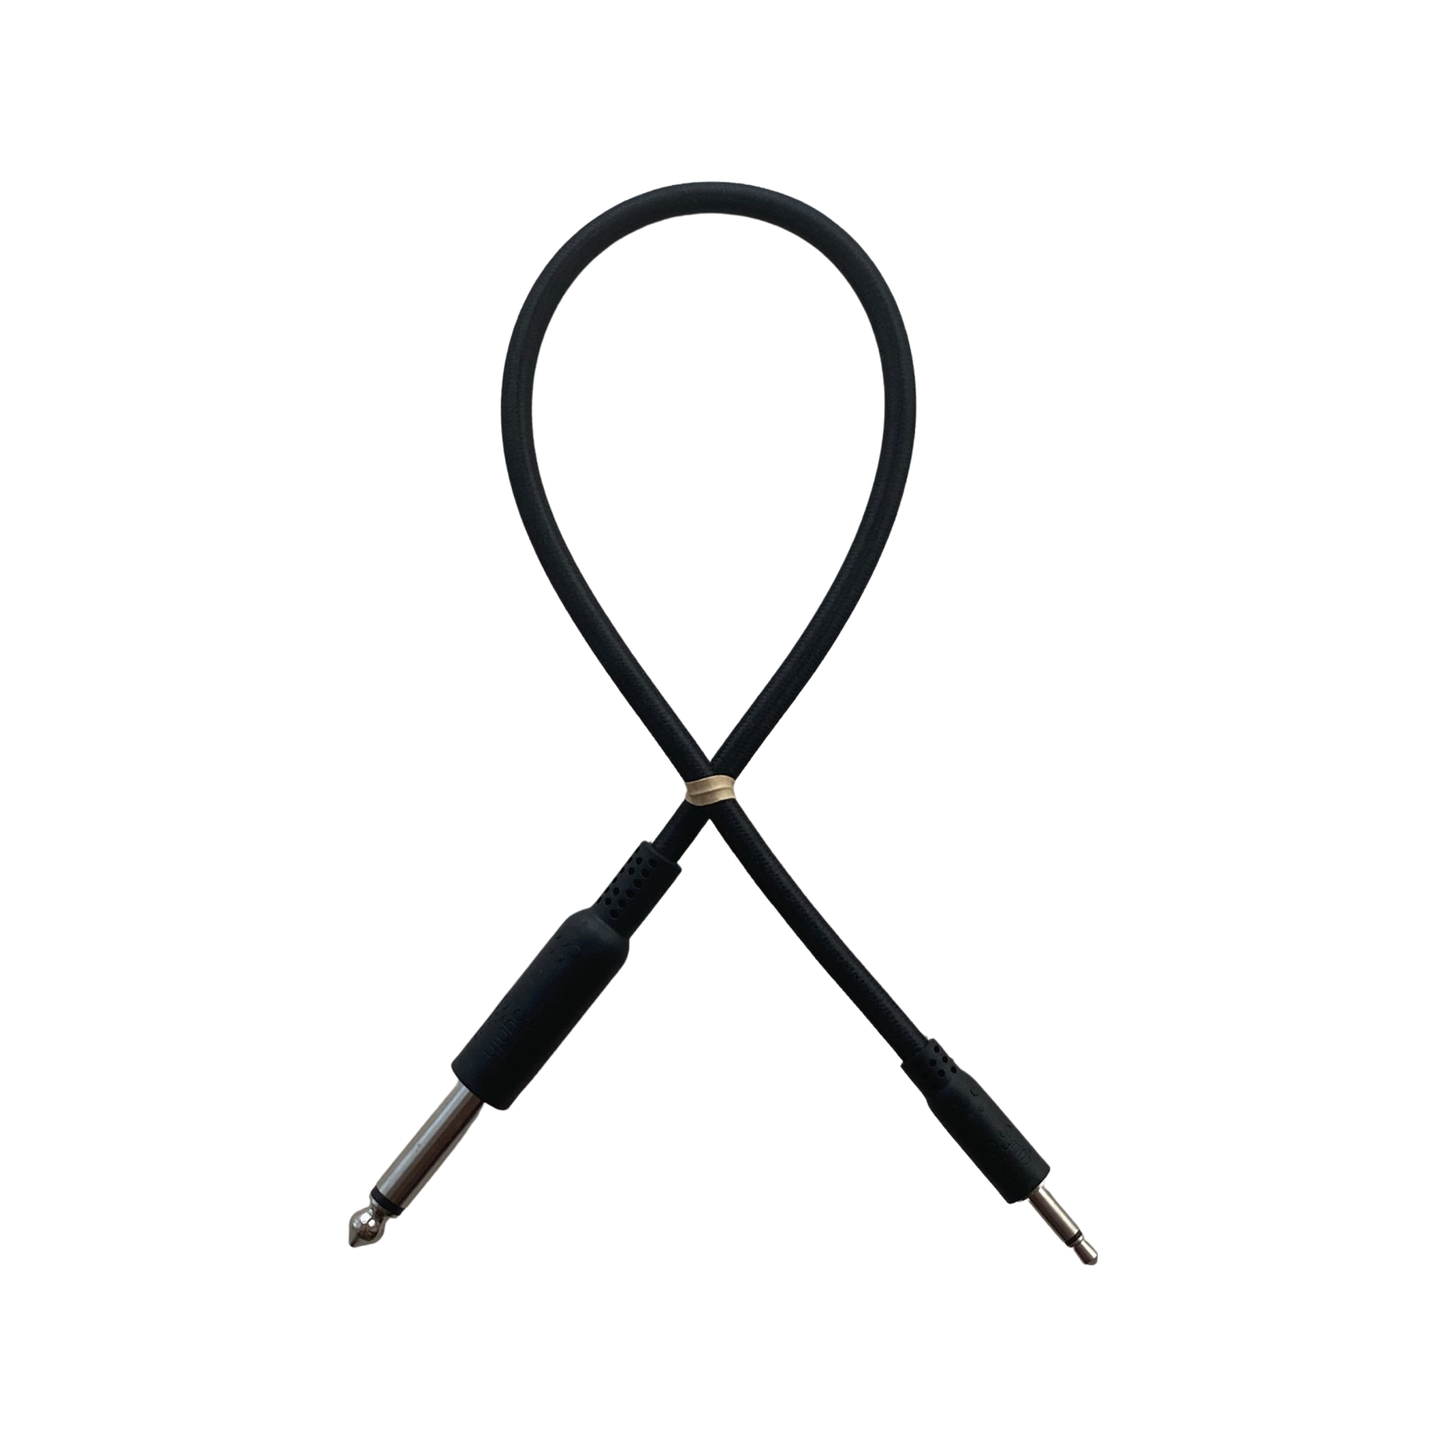 6.5mm to 3.5mm Adaptor Cable